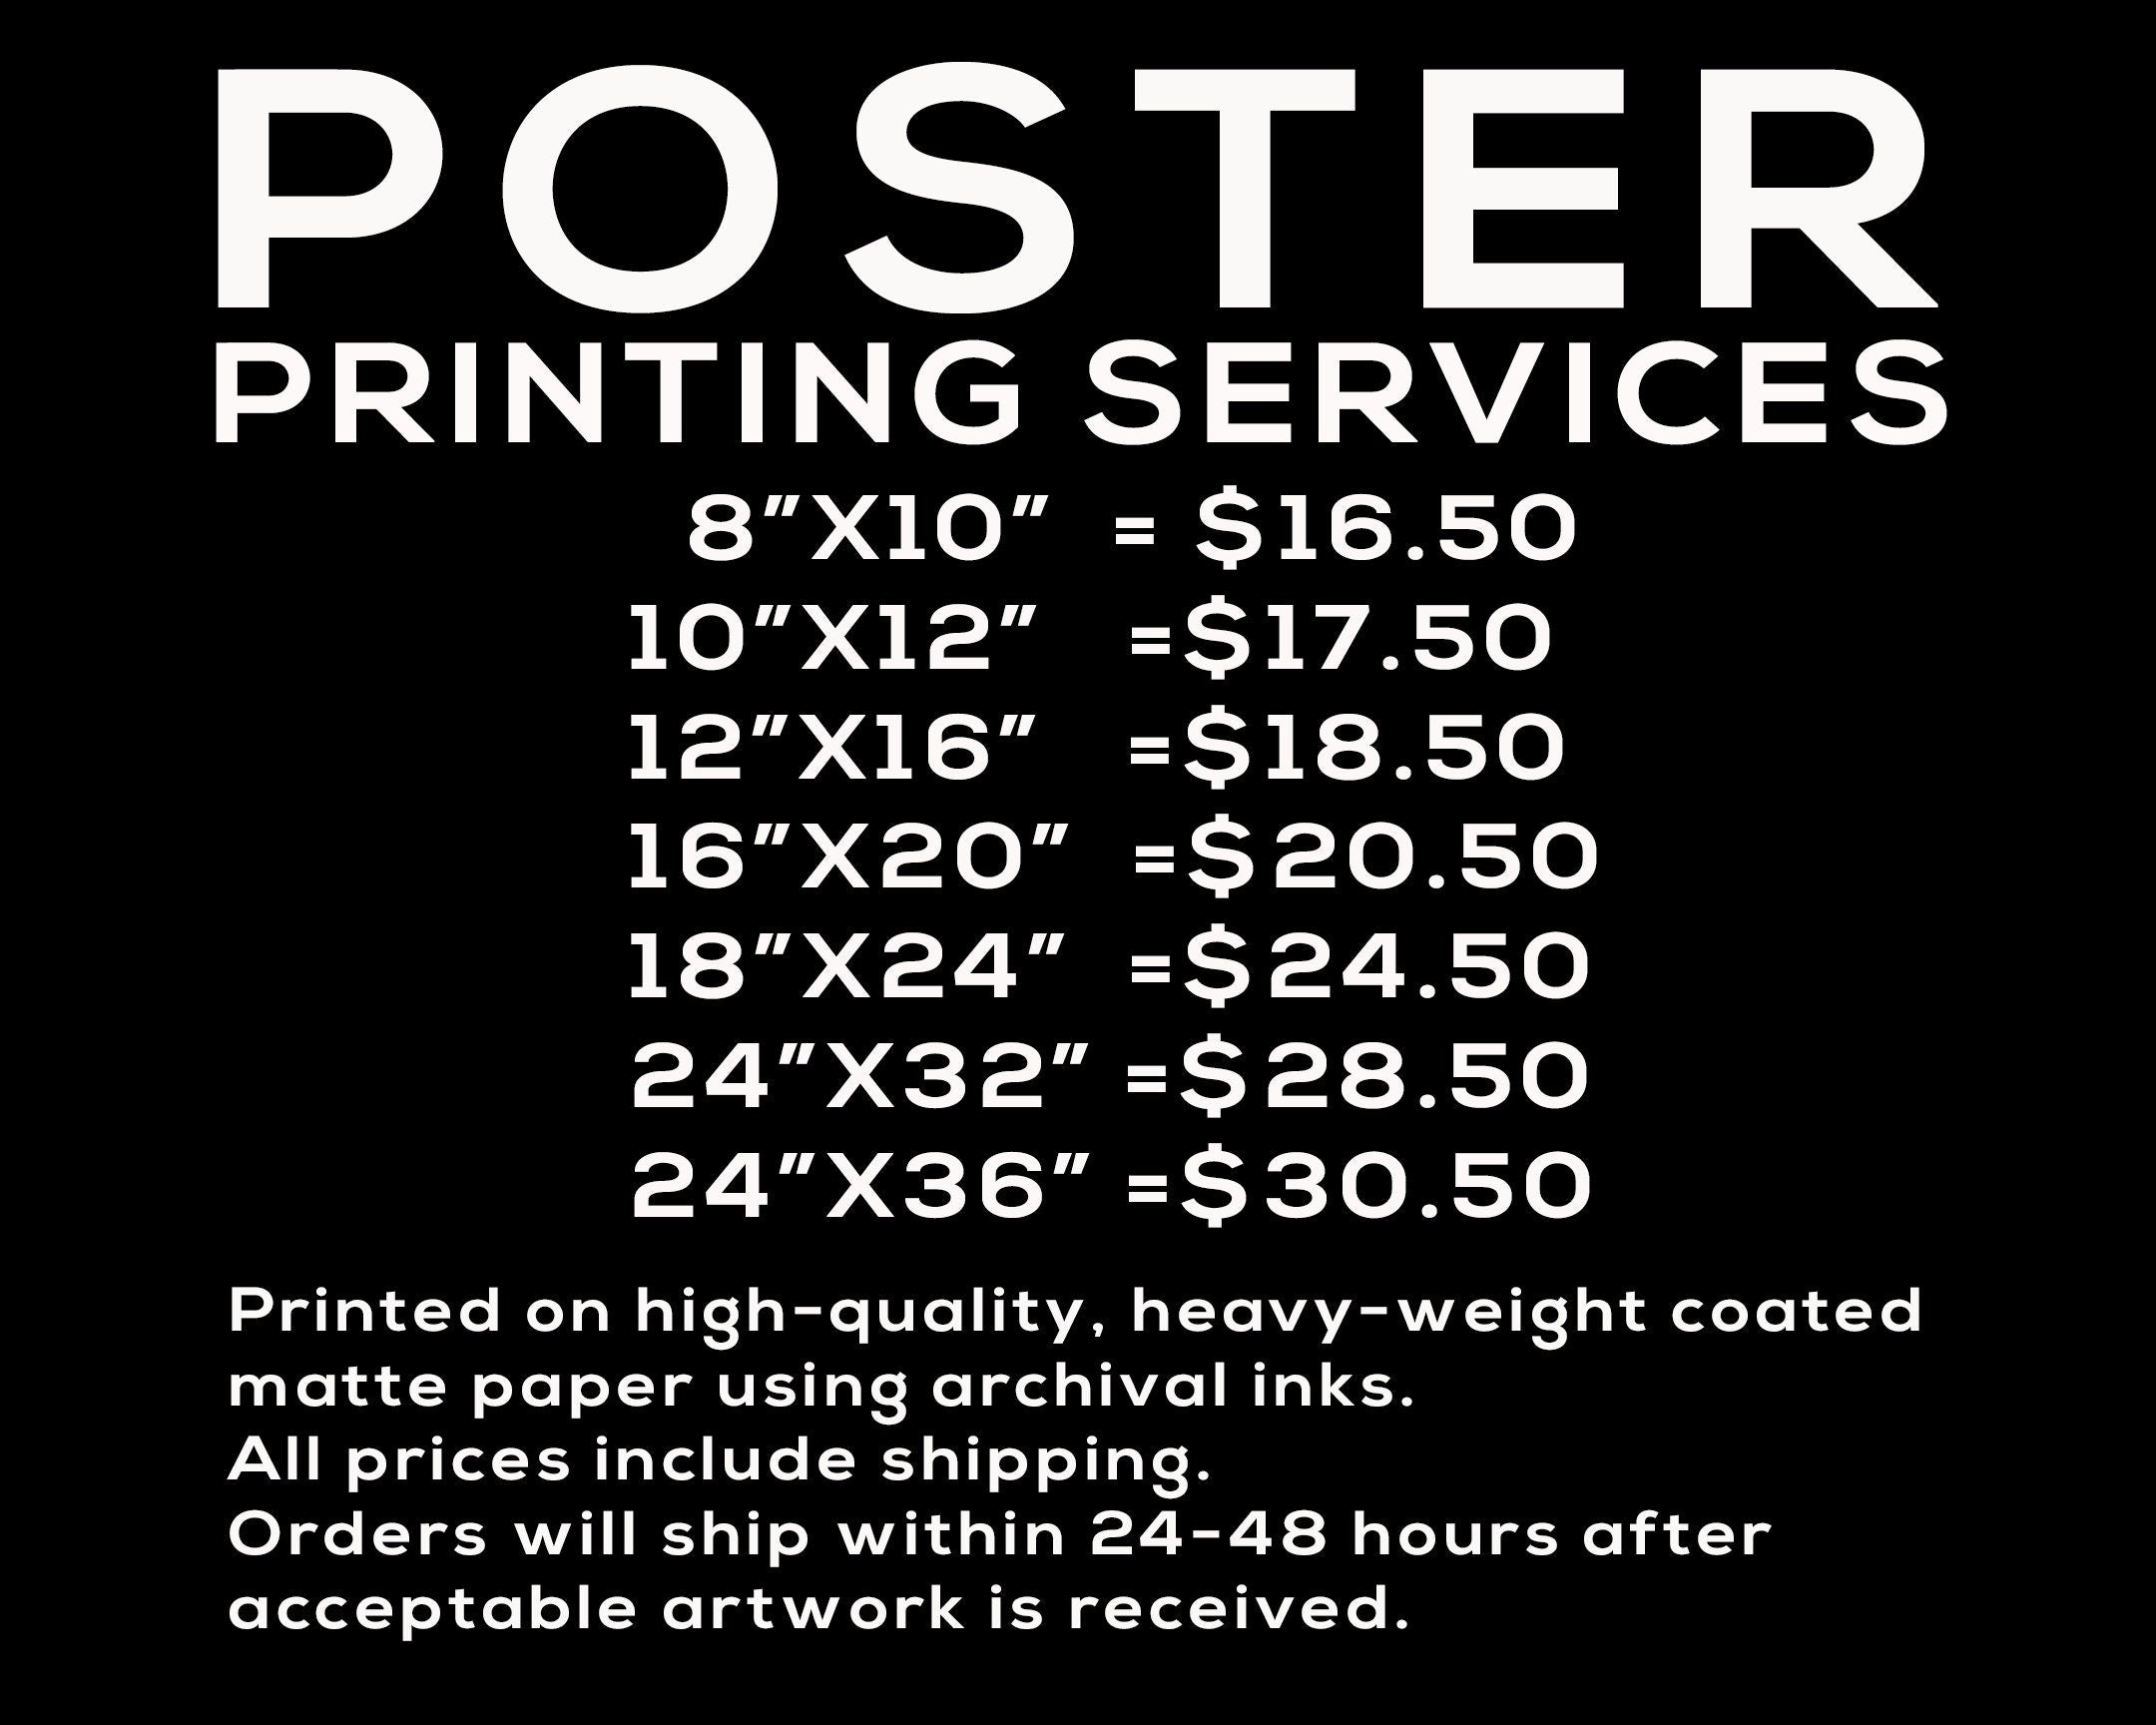 Poster, Custom Printing Services, Fulfillment Services, Dropshi Artable store